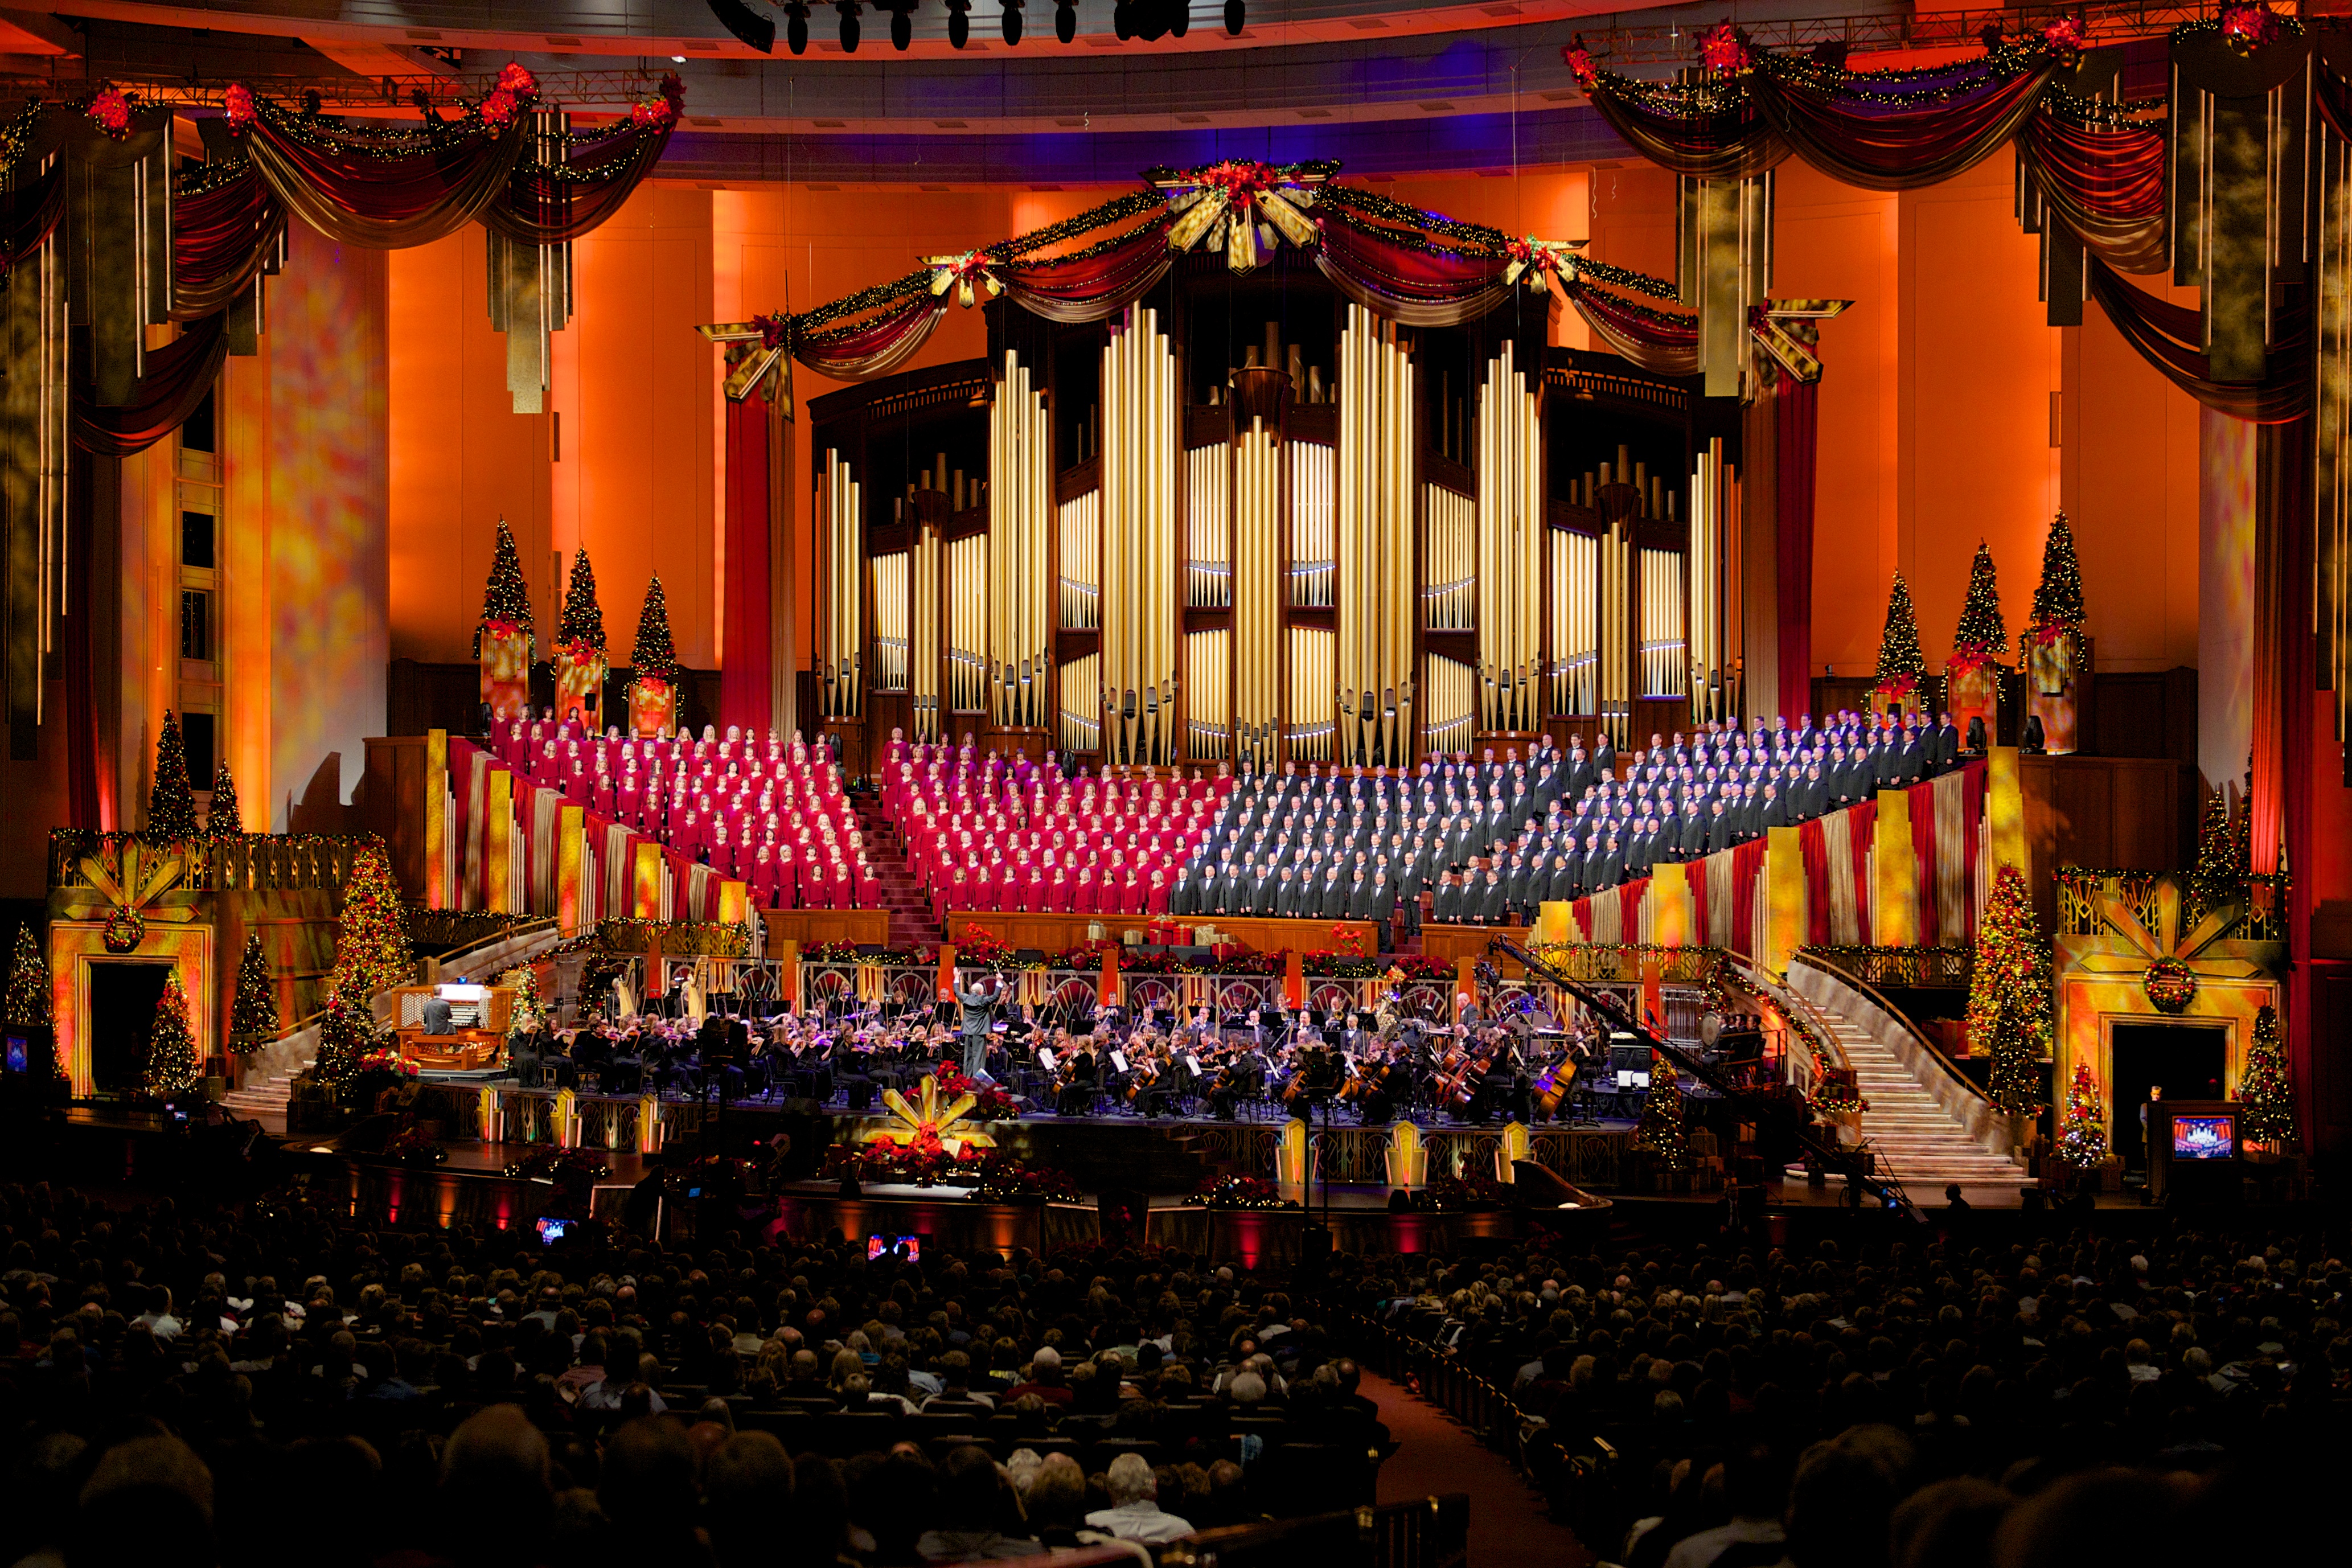 Renowned soprano, actor join Mormon Tabernacle Choir for the holidays - The Daily Universe